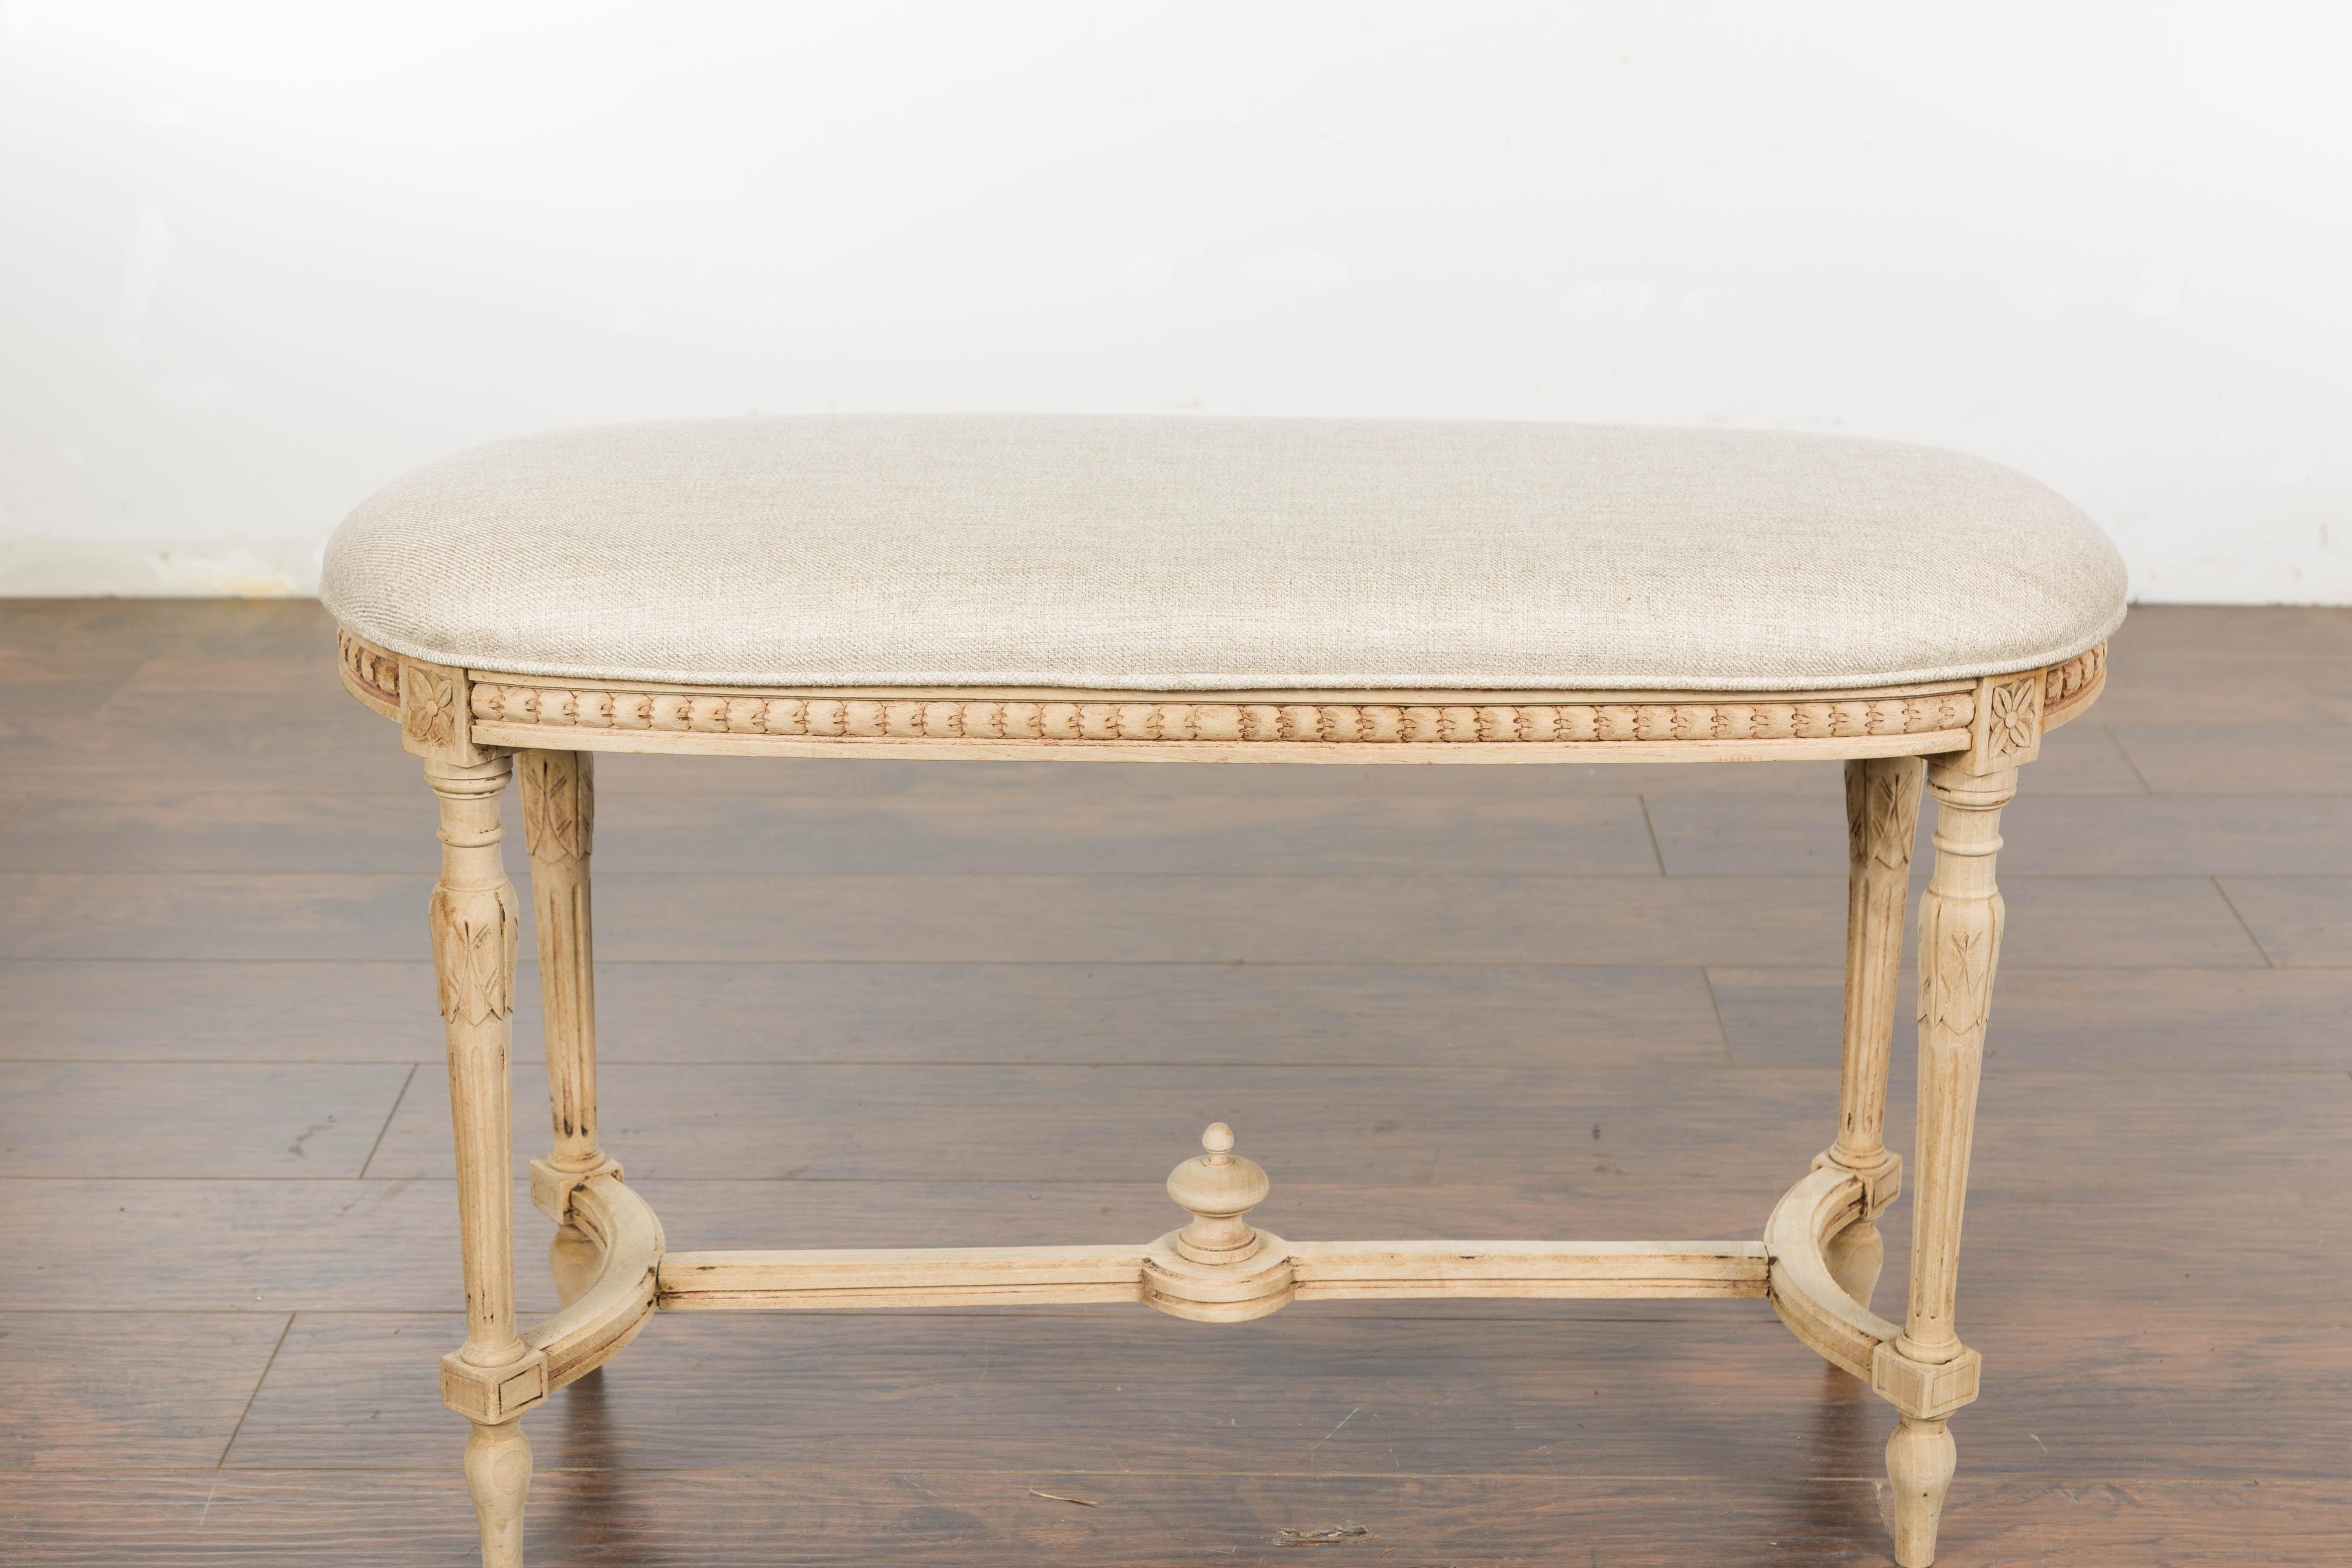 Neoclassical Style 1900s French Carved Walnut Bench with Natural Finish For Sale 1